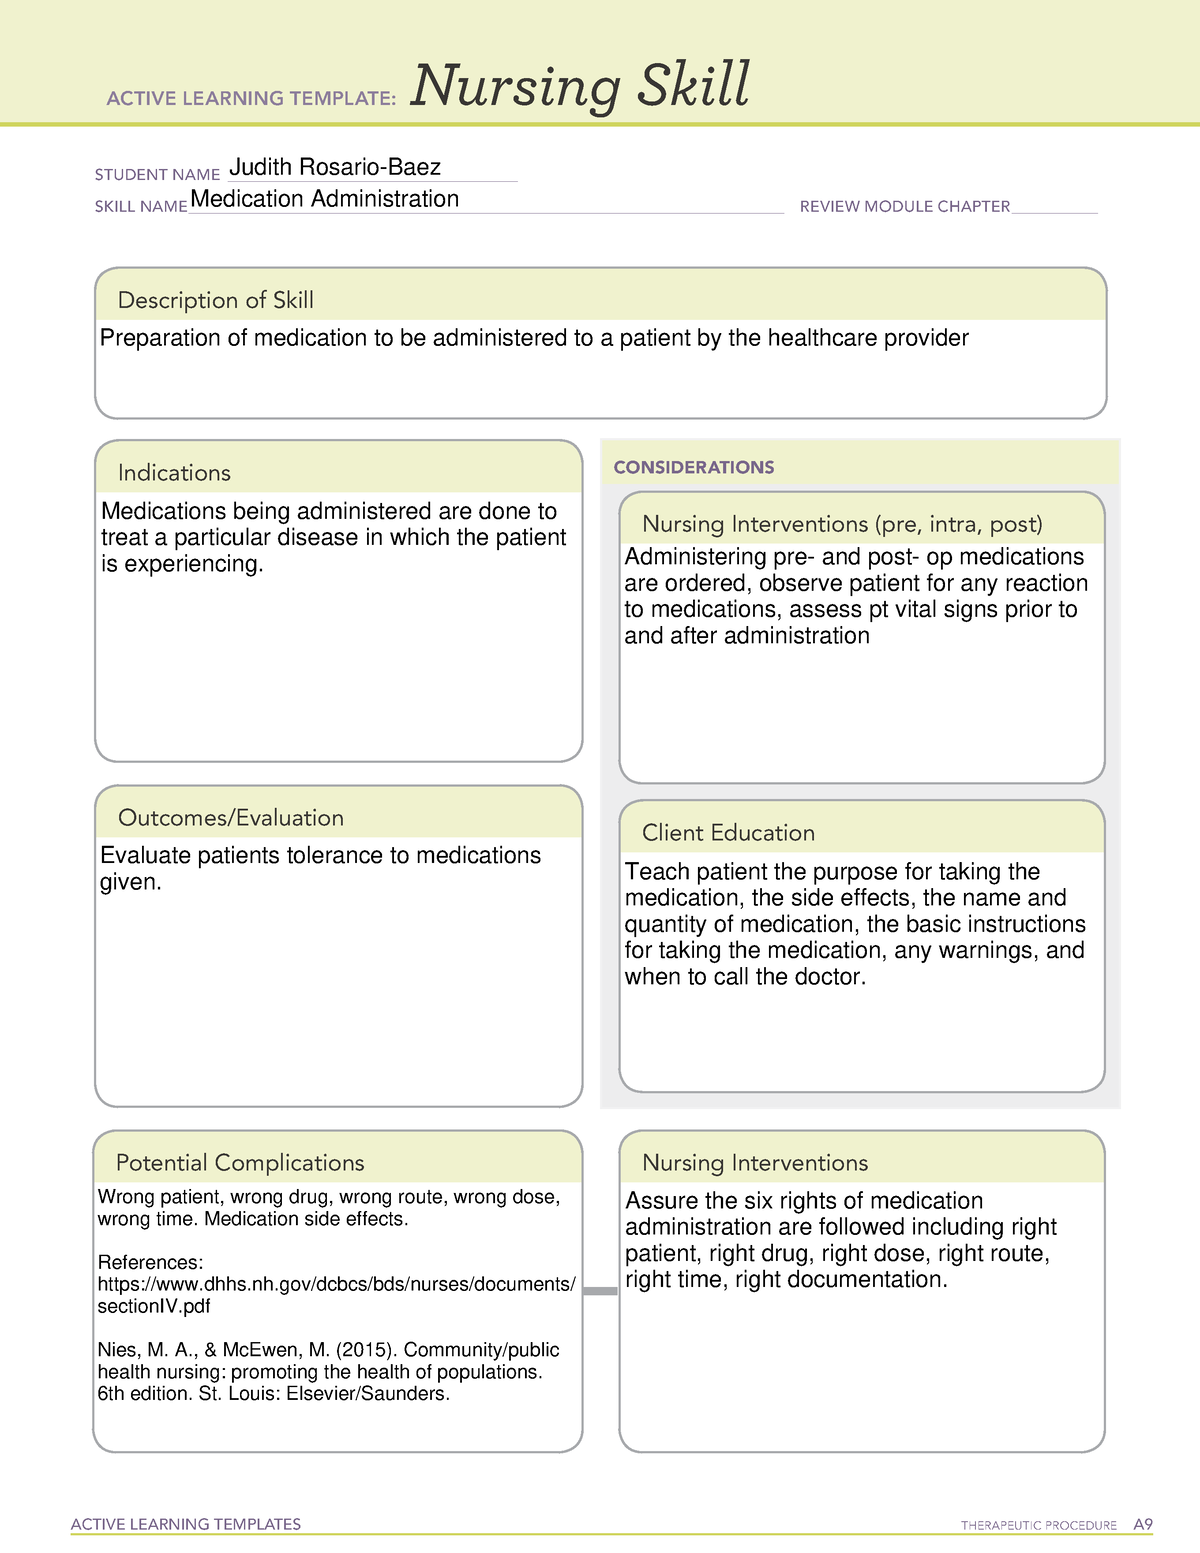 Active Learning Template Nursing Skill form ACTIVE LEARNING TEMPLATES